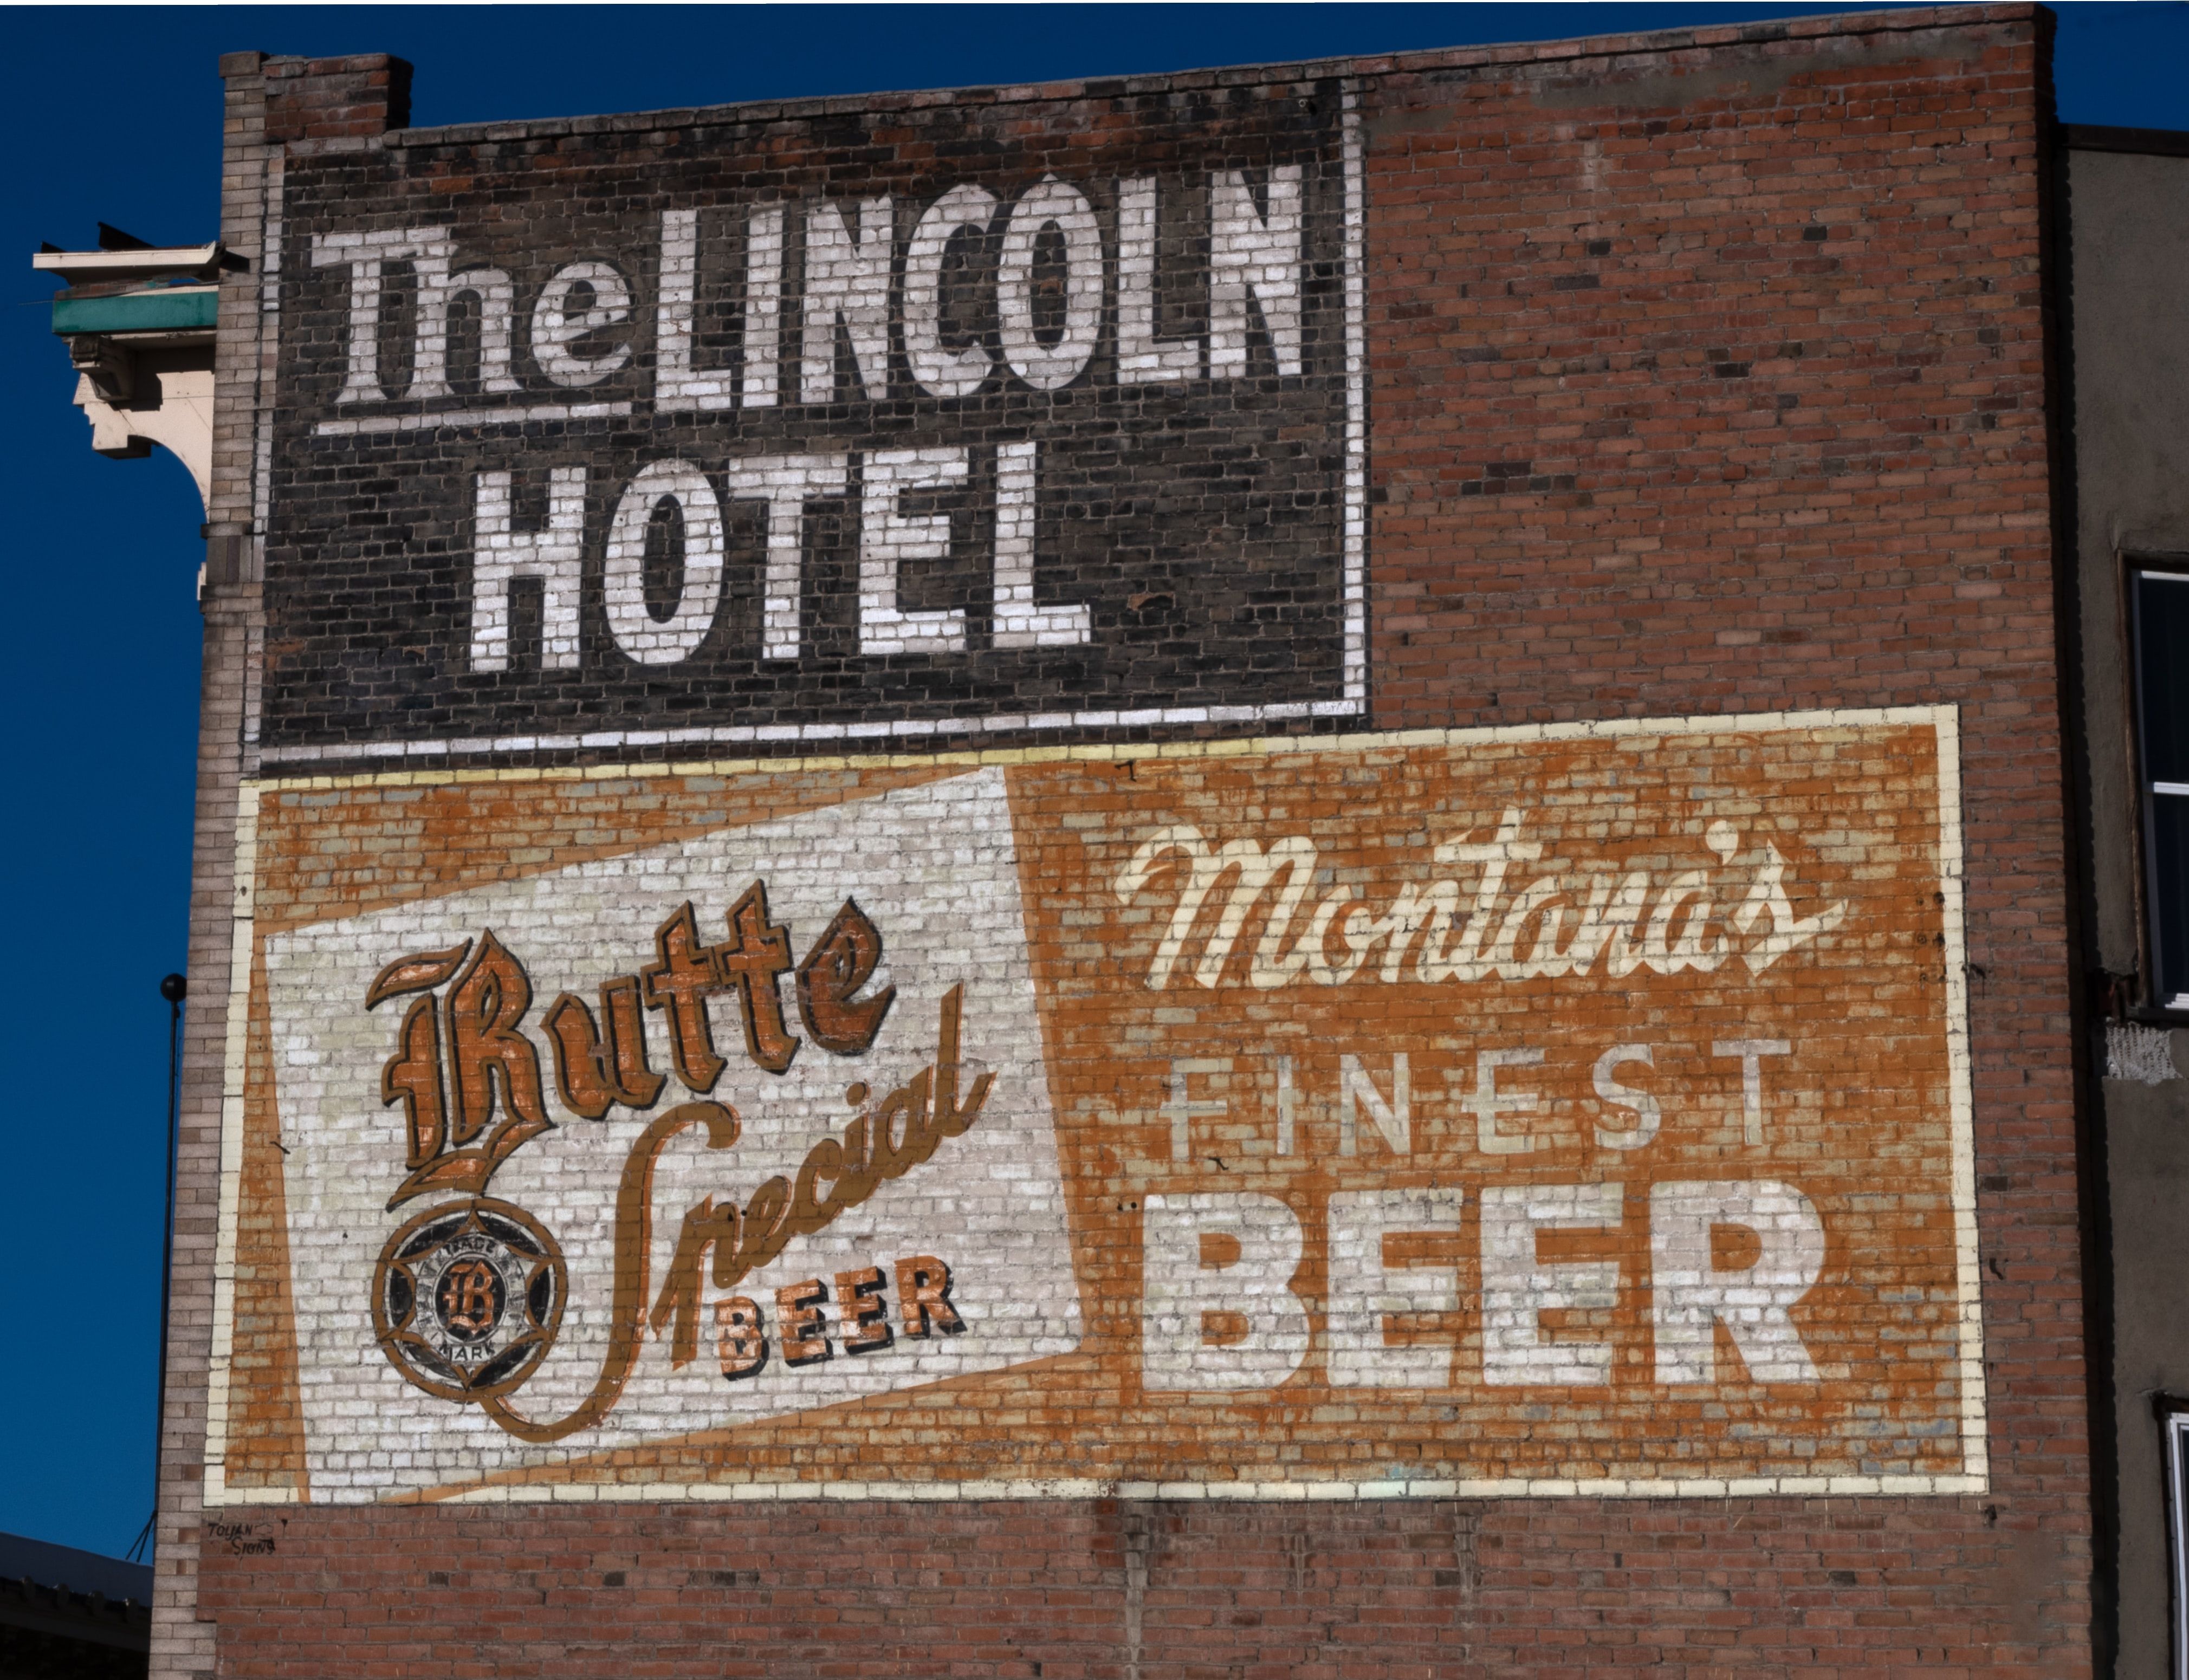 The old Lincoln Hotel in Butte, Montana